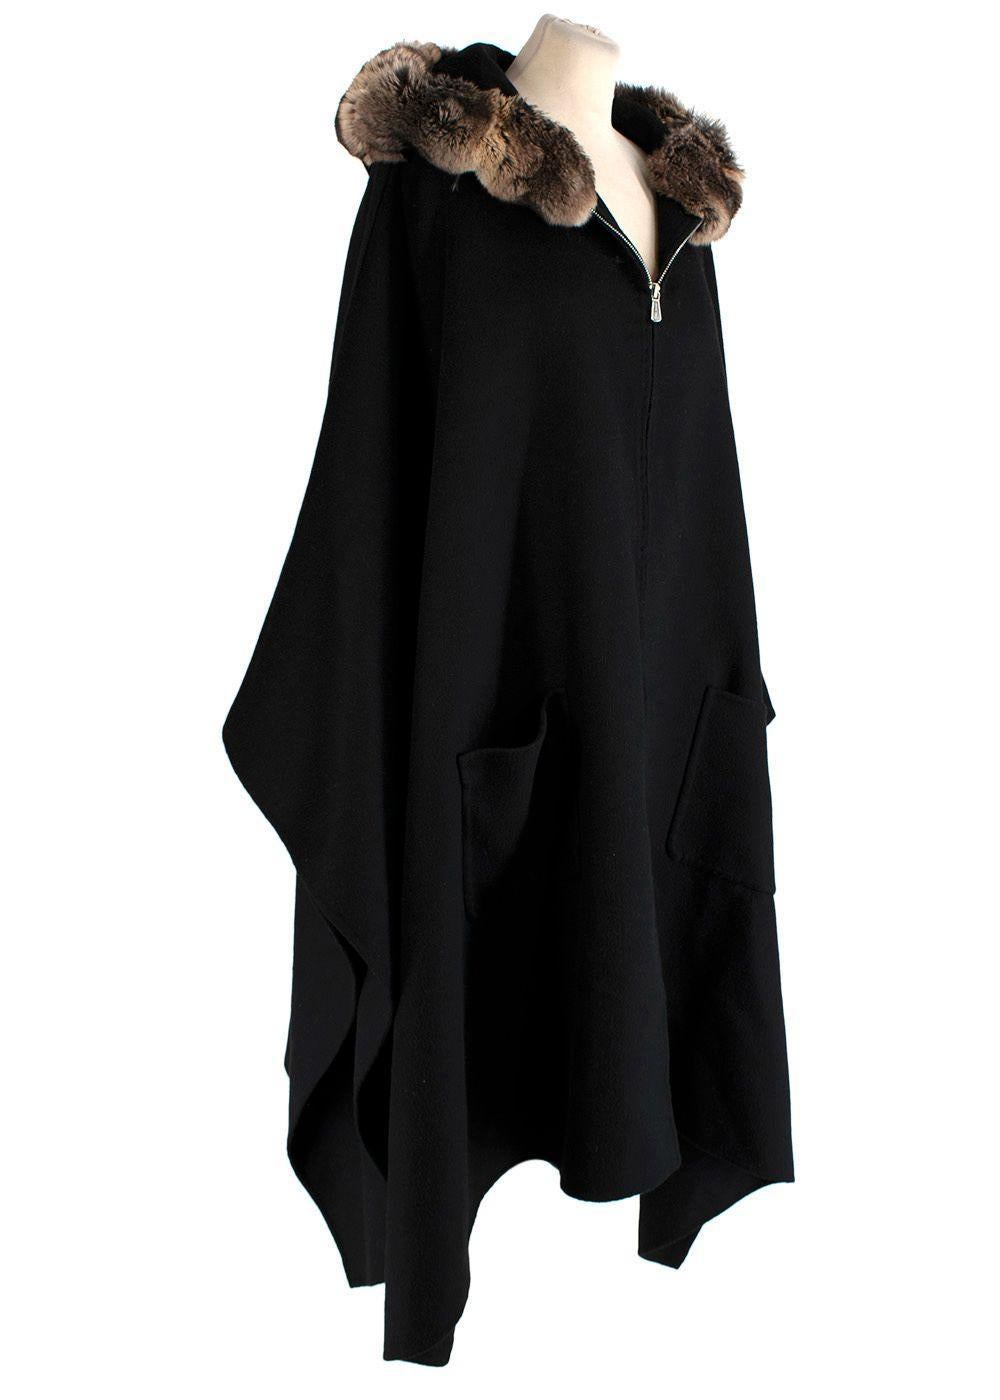 Black Loro Piana cashmere cape with chinchilla fur, dual patch pockets at sides and hidden zip closure at center front. One size

100% Cashmere; Trim 100% Chinchilla


Length 39.5 inches / 101 cm (from shoulder)


Width 139 cm / 54.7 inches
